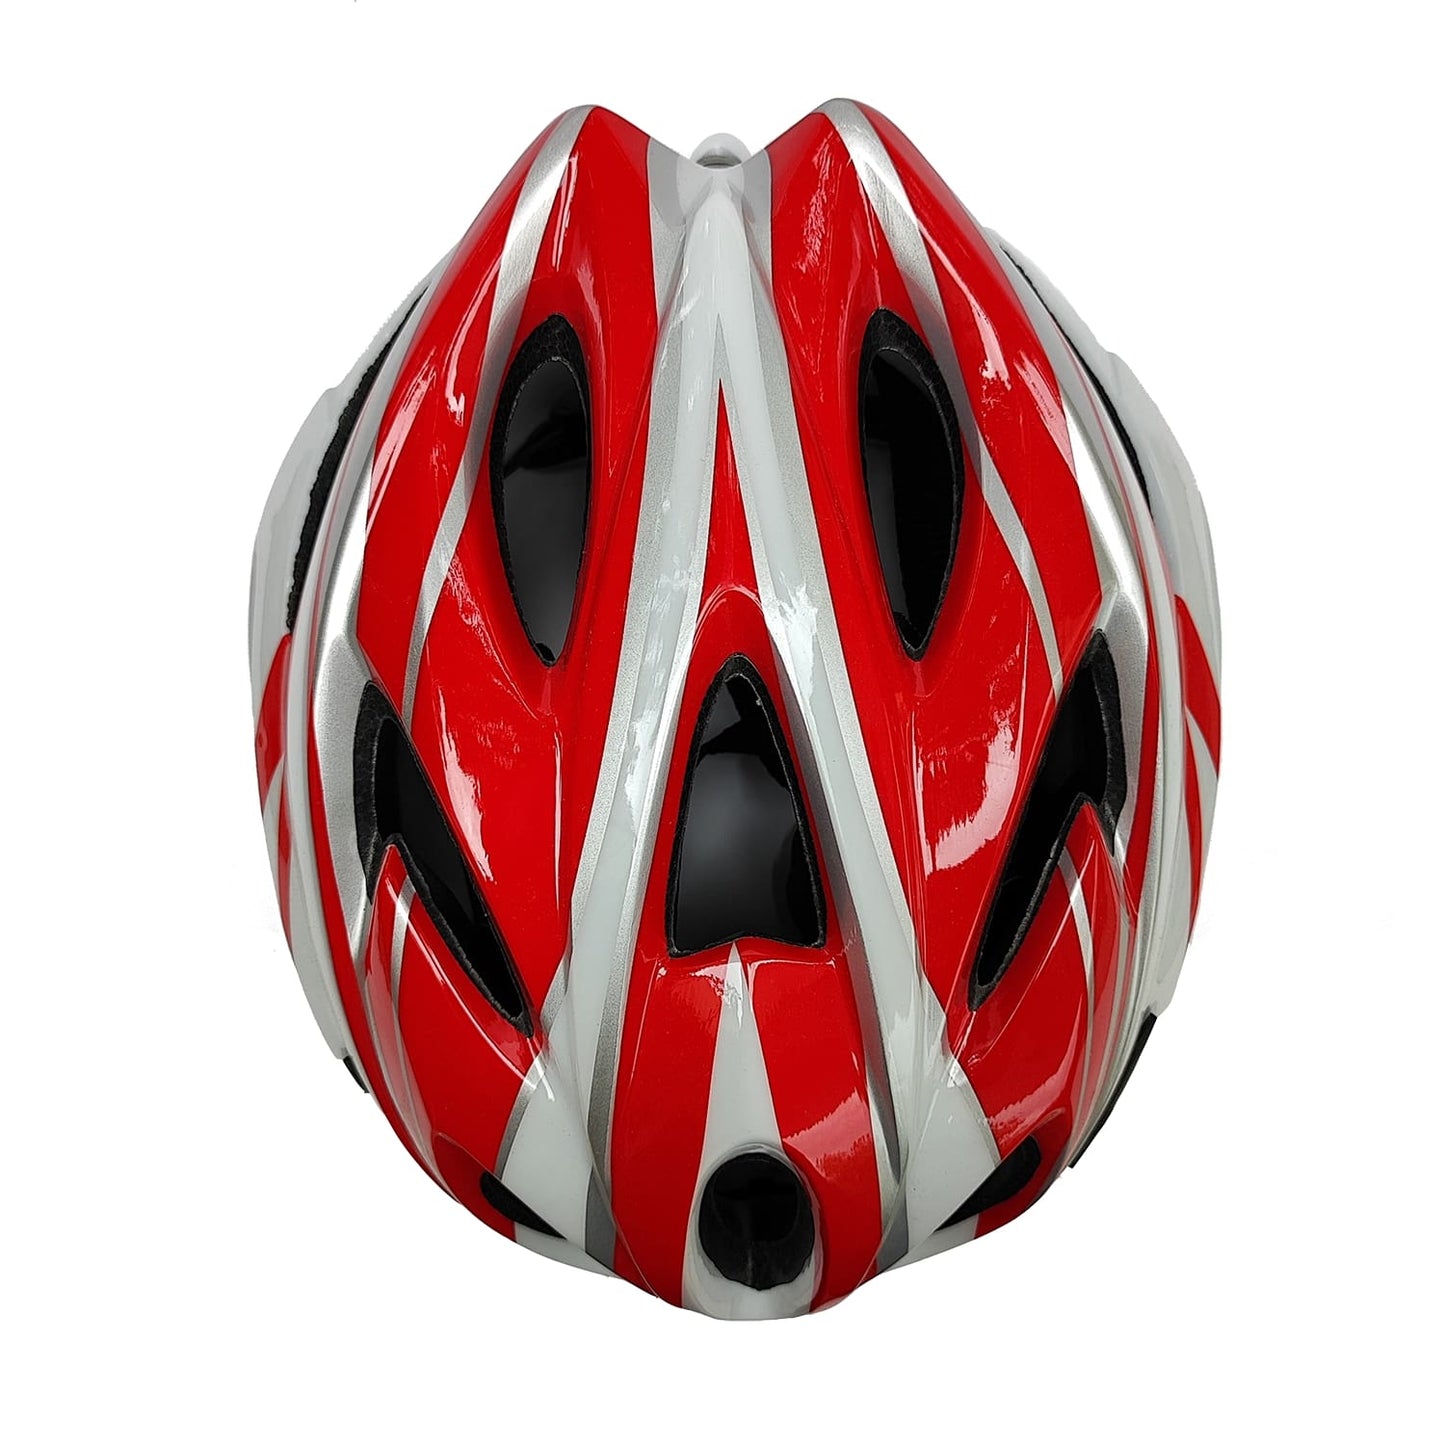 Bicycle helmet red color closeup view by omobikes